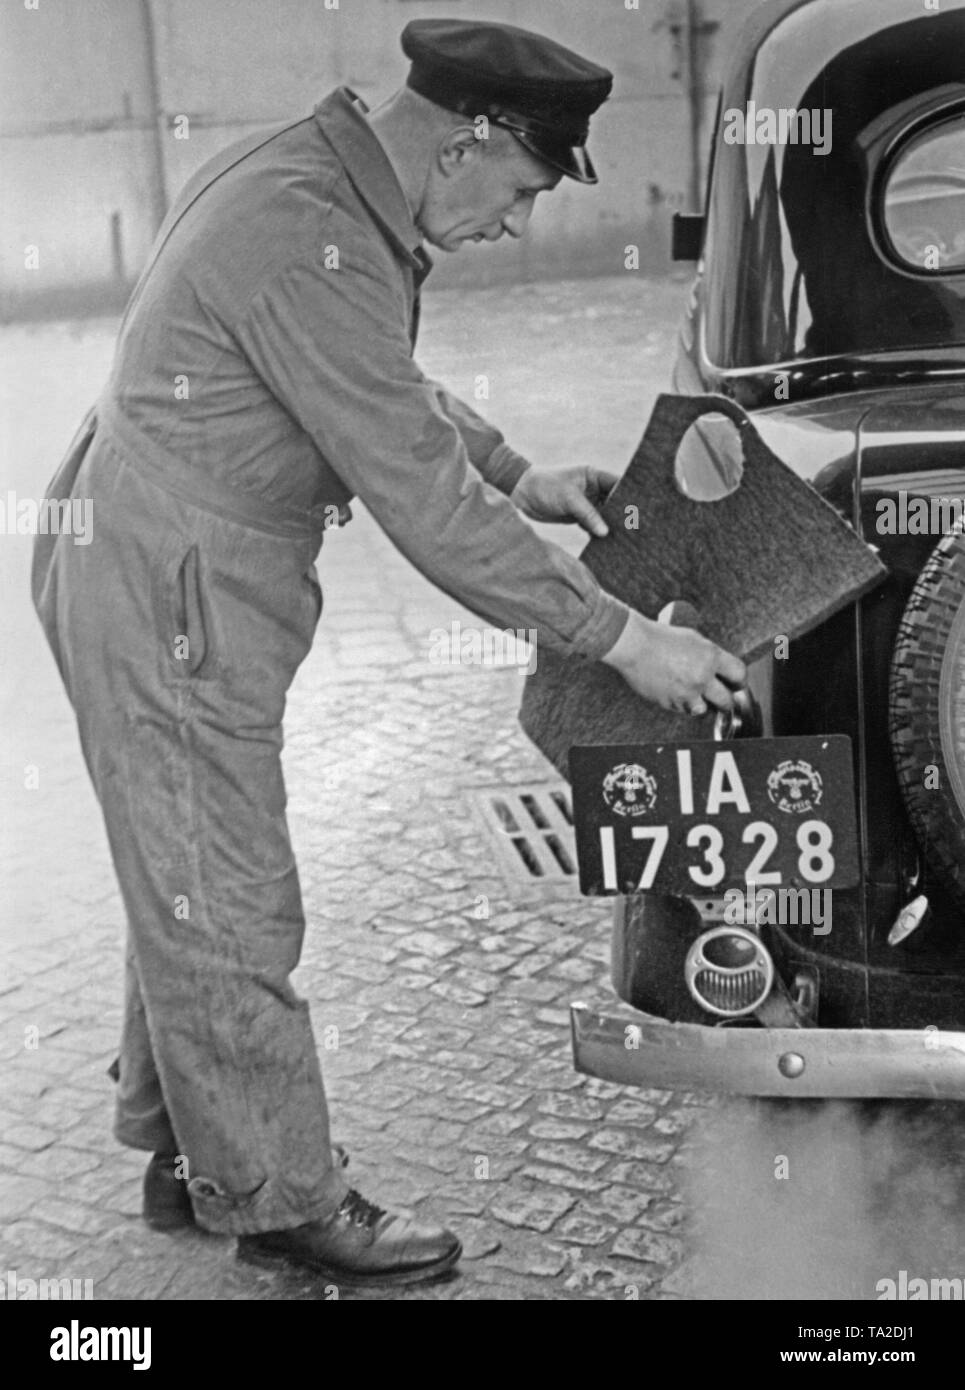 A gas station attendant puts a filling protection around the filler neck before refueling, in order to protect the paint from damage caused by overflowing gasoline. Stock Photo